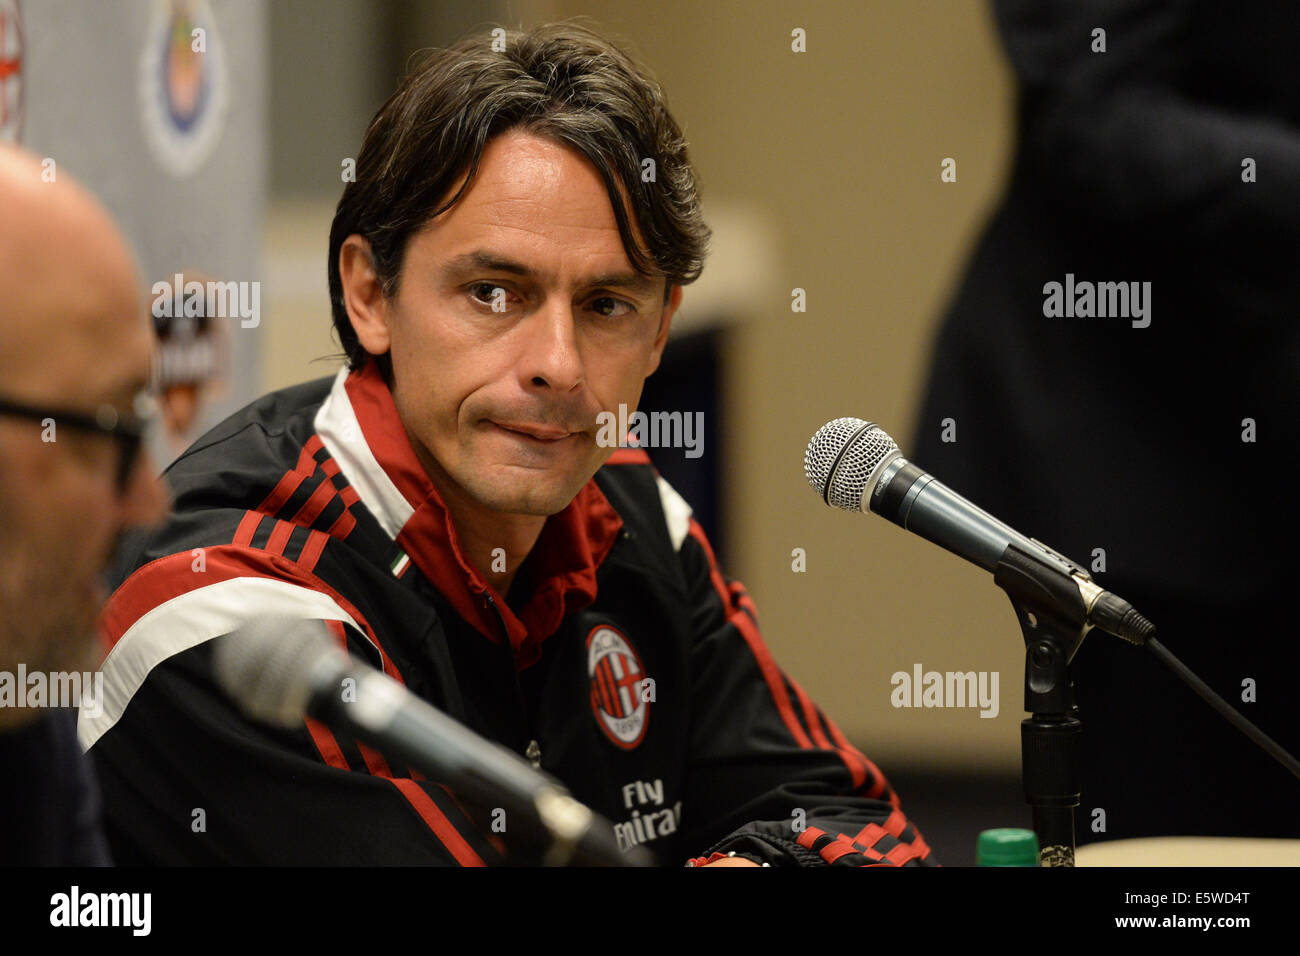 Houston, Texas, USA. 6th Aug, 2014. AC Milan head coach Filippo Inzaghi fields questions in the post-game press conference after a friendly between AC Milan and Chivas de Guadalajara at NRG Stadium in Houston, TX on August 6th, 2014. AC Milan won the game 3-0. Credit:  Trask Smith/ZUMA Wire/Alamy Live News Stock Photo